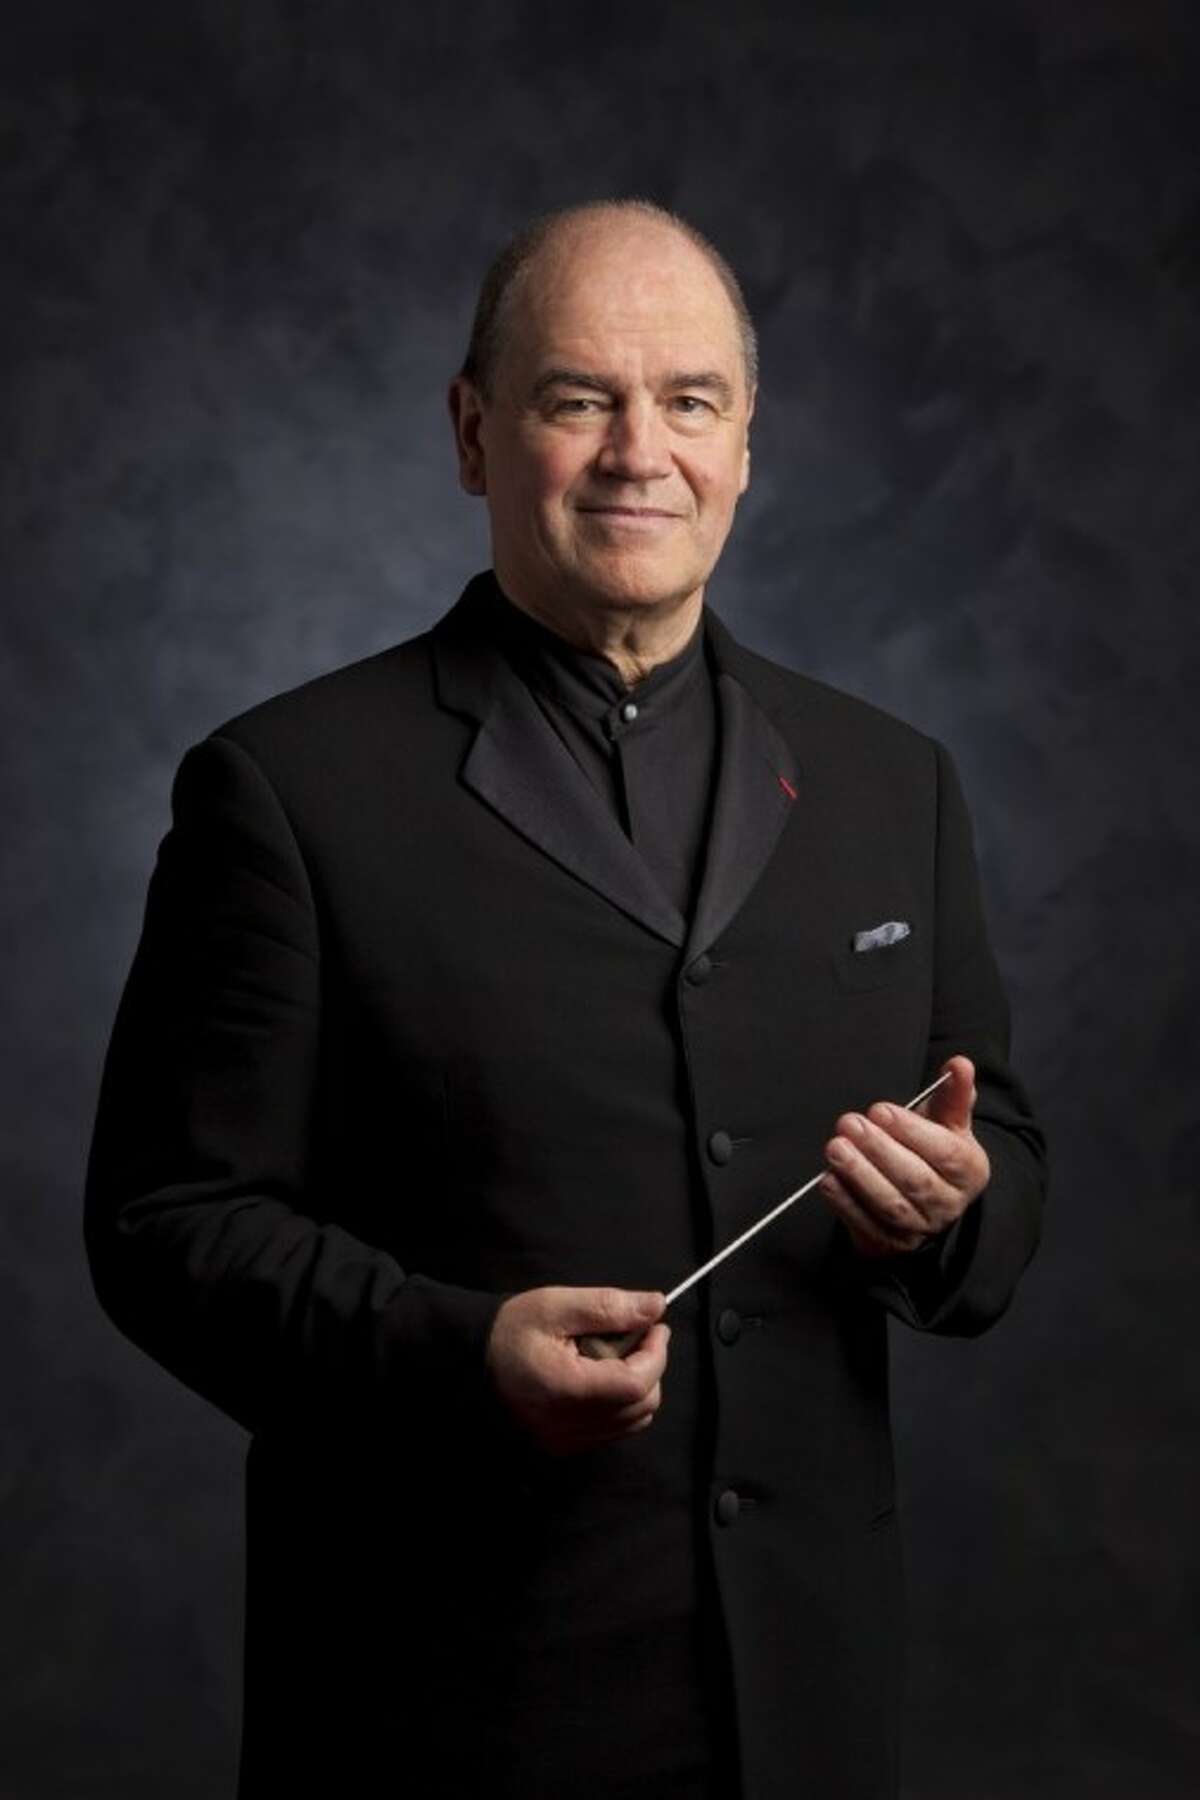 Hans Graf conducts the Houston Symphony for Evening with Brahms Sept. 21 at The Cynthia Woods Mitchell Pavilion. The concert features the best works of Johannes Brahms.